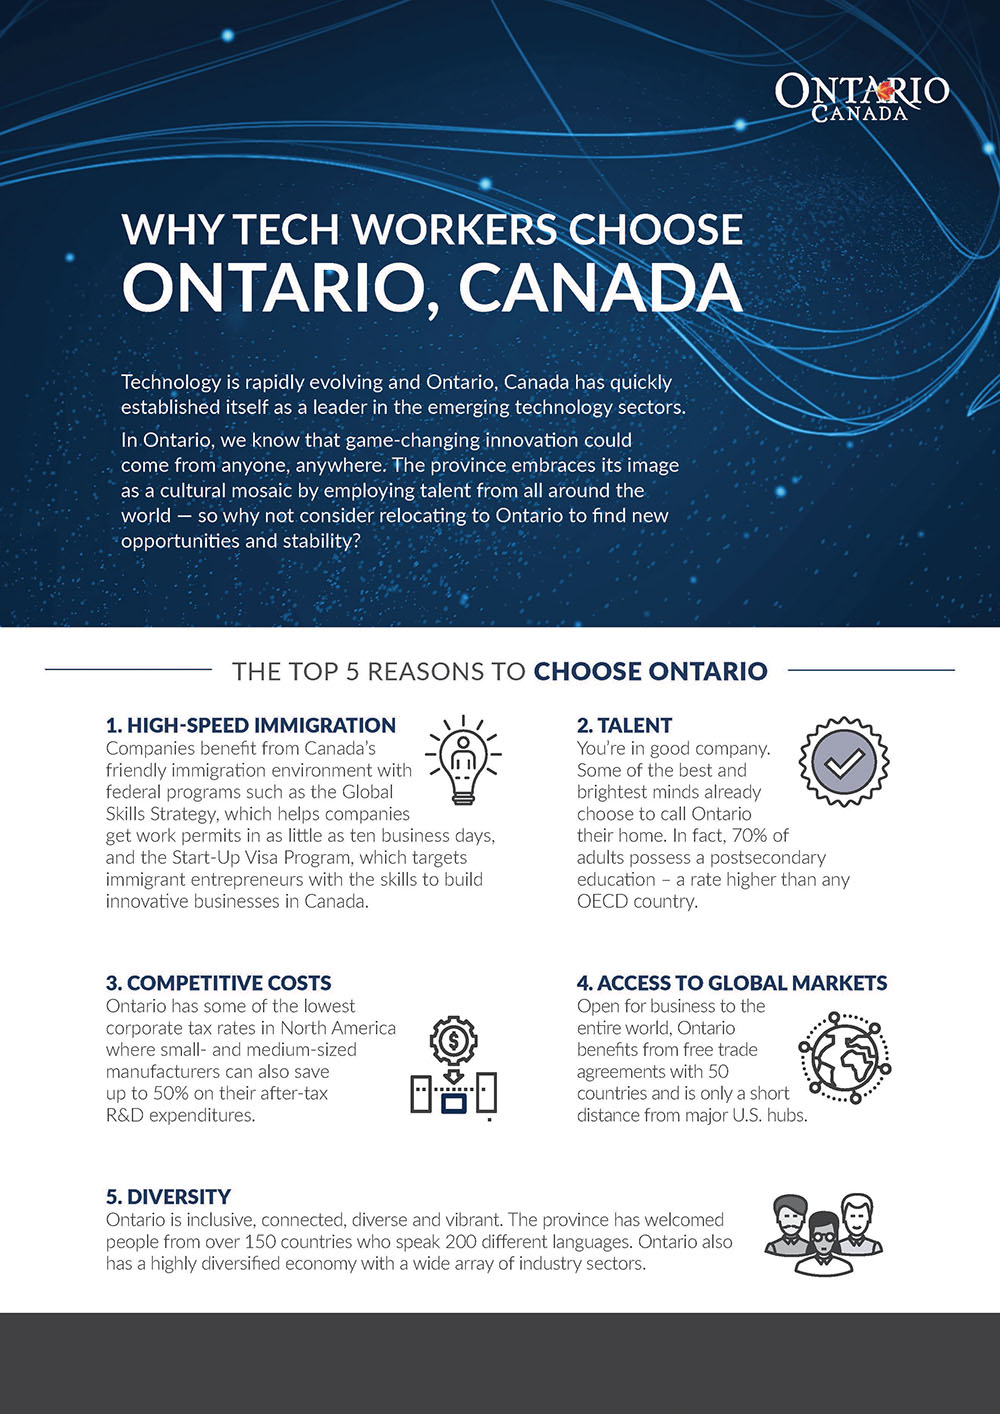 Why tech workers choose Ontario, Canada